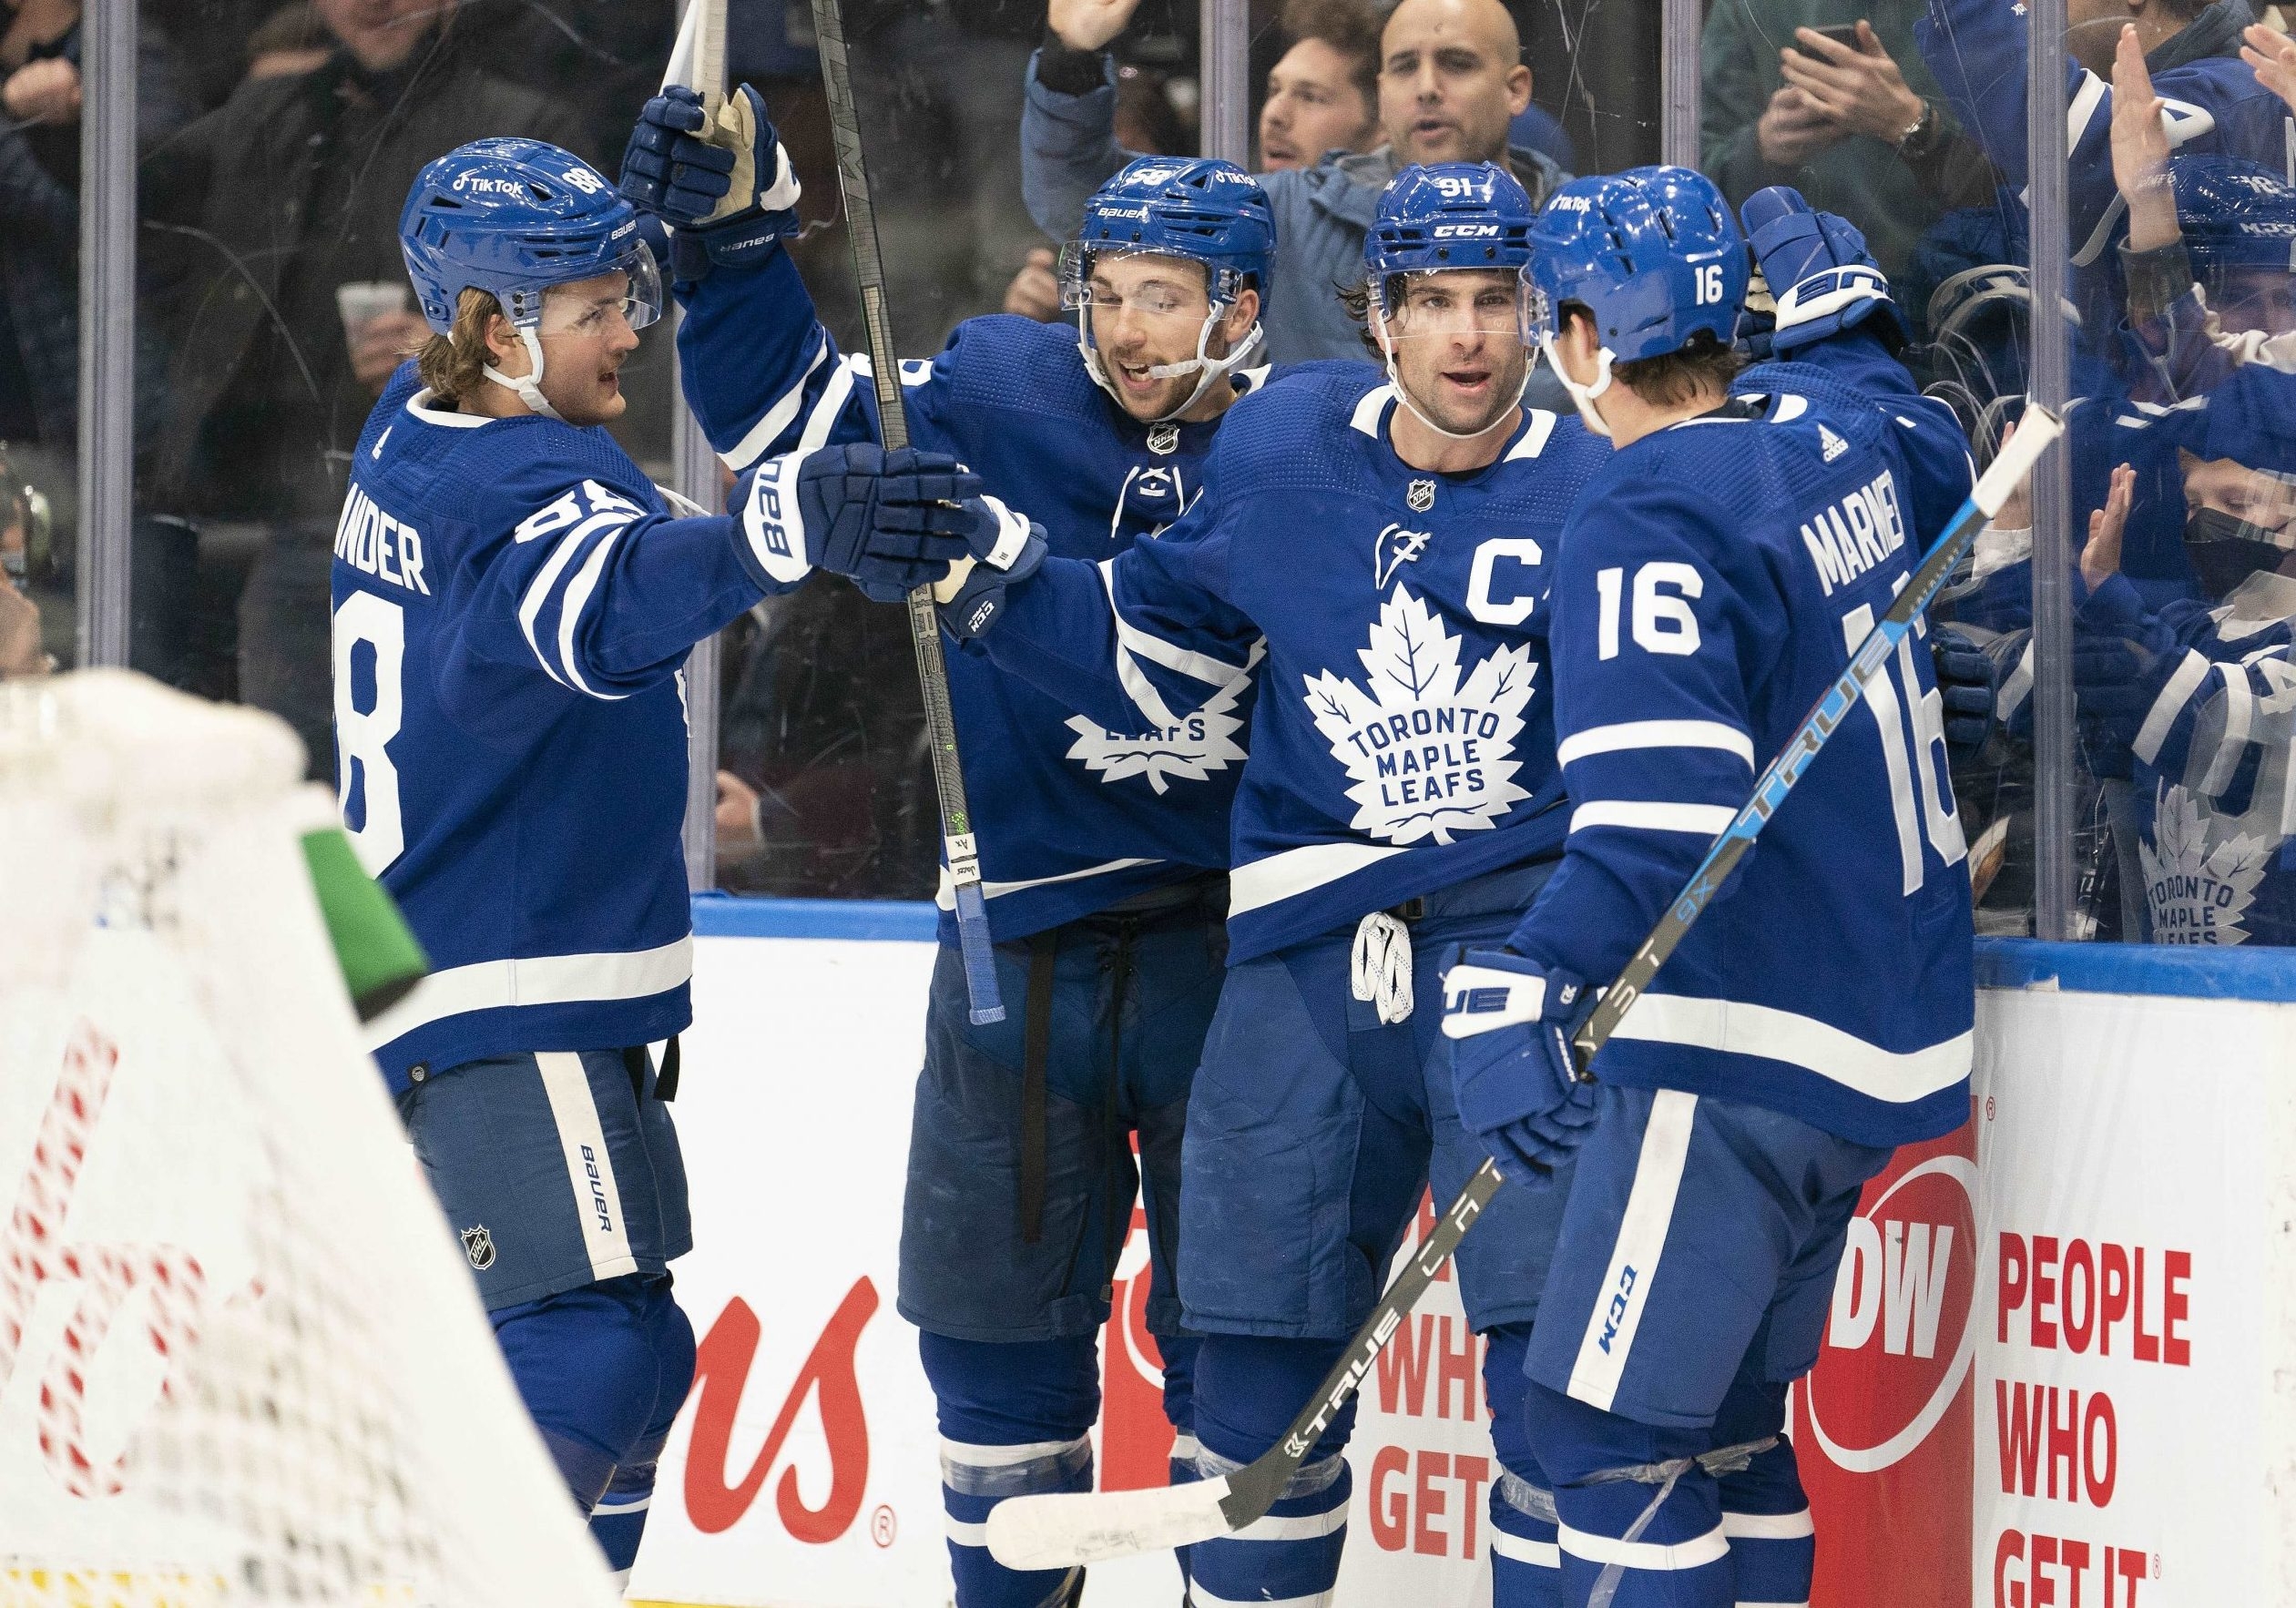 Cherry praises fans for peaceful viewing of Leafs